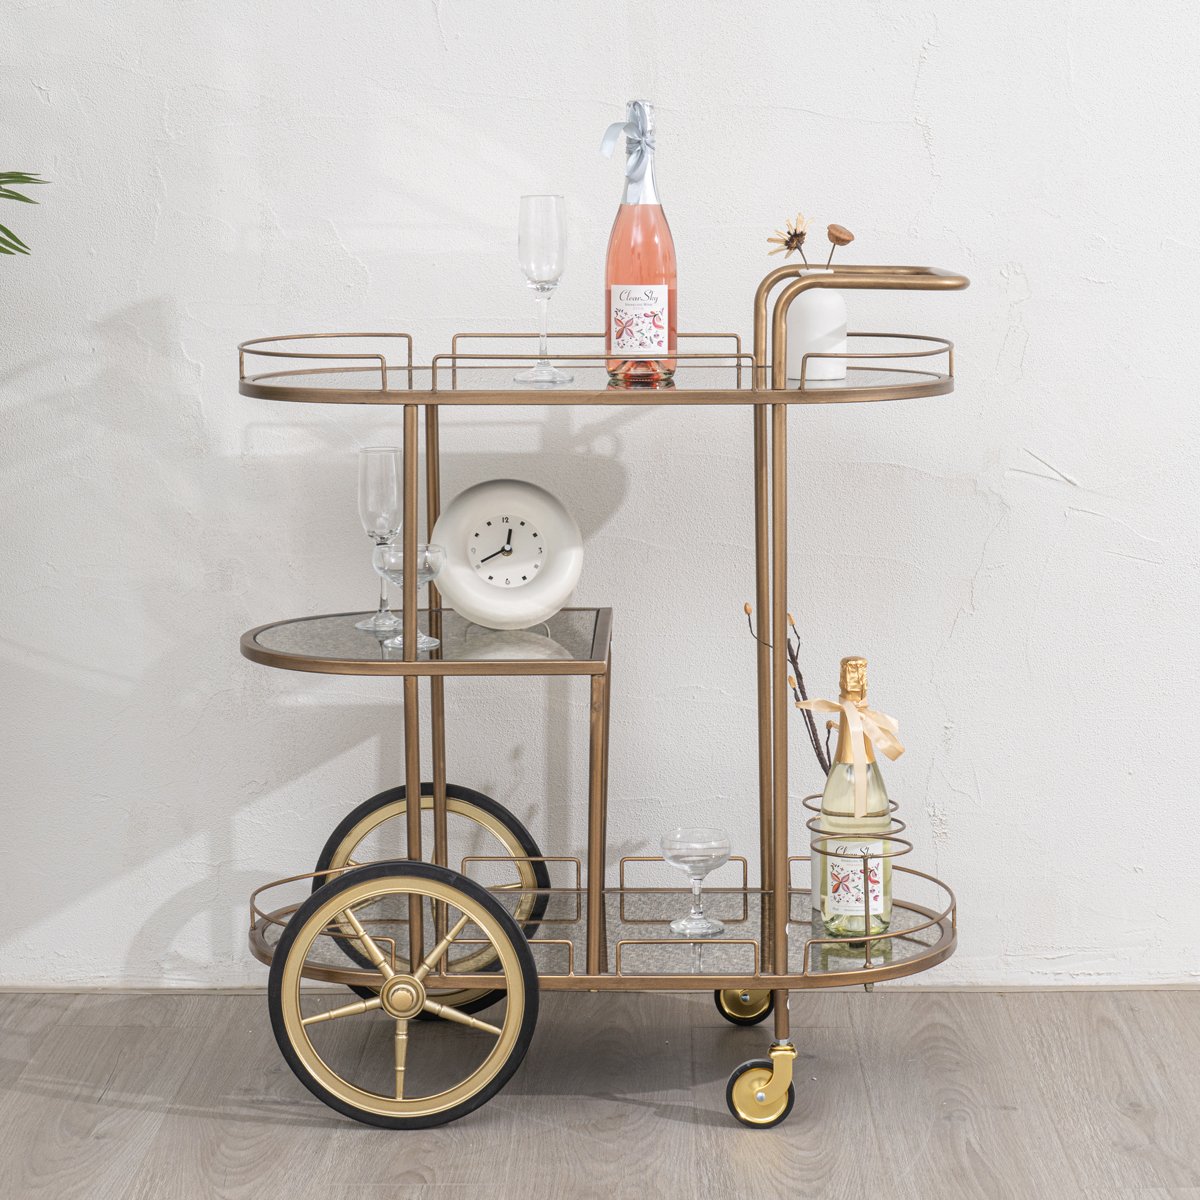 Large Gold Antique Glass Oval Drinks Trolley With Wheels